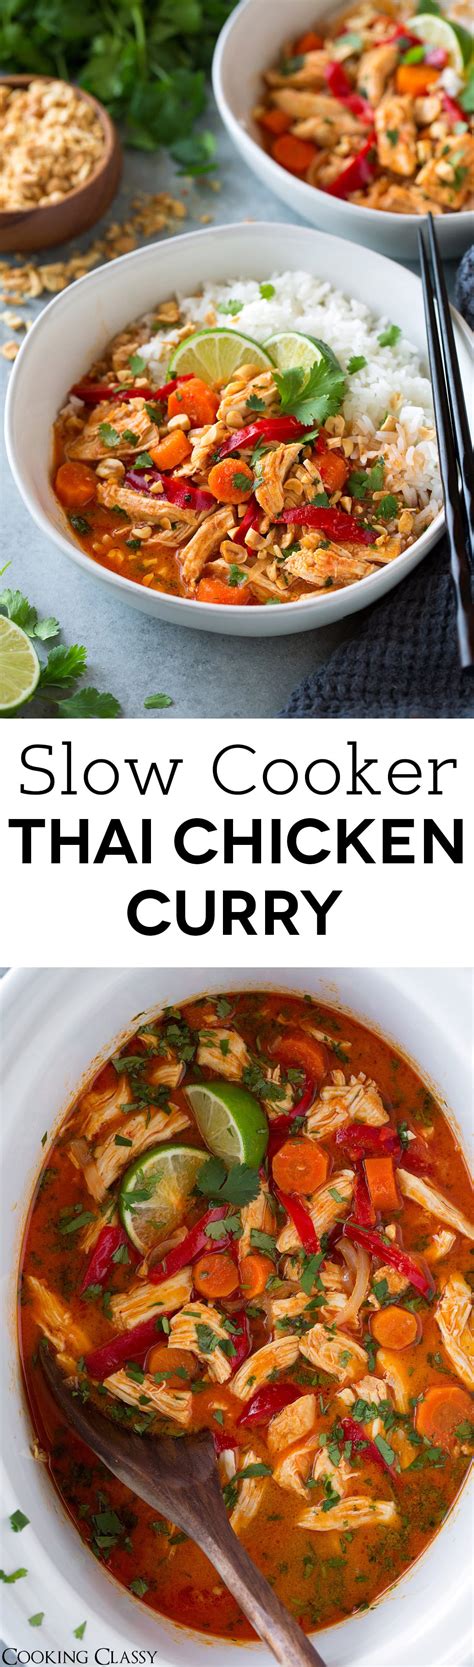 thai-chicken-curry-slow-cooker-or-instant image